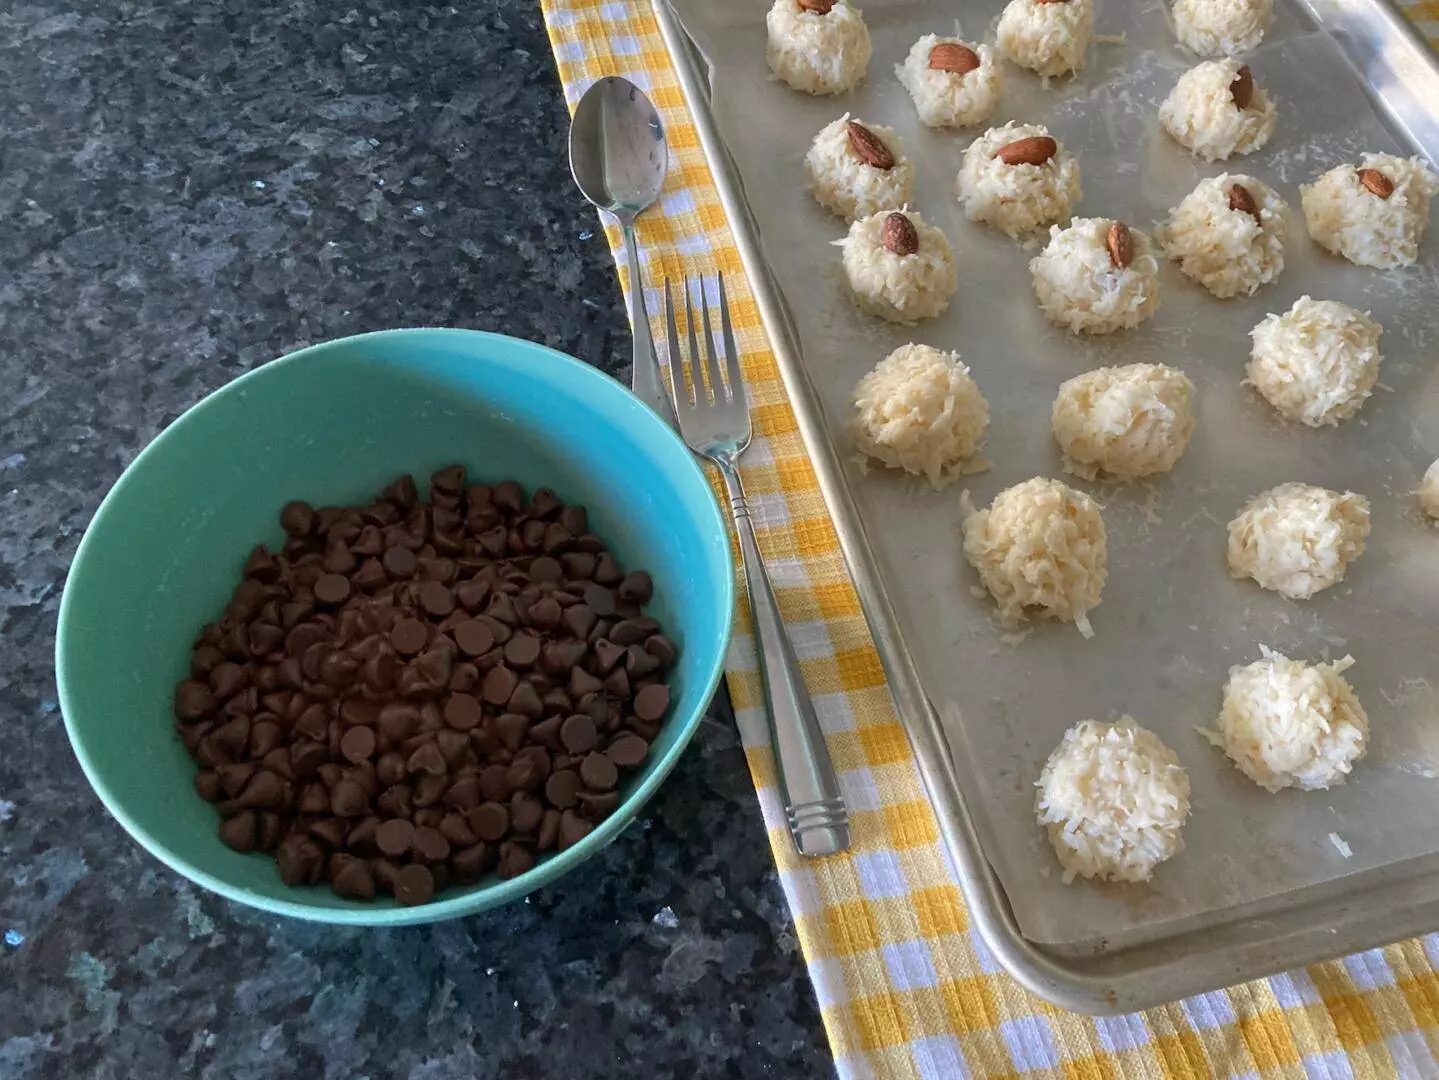 Easy Chocolate Coconut Balls from Out of the Box Baking.com